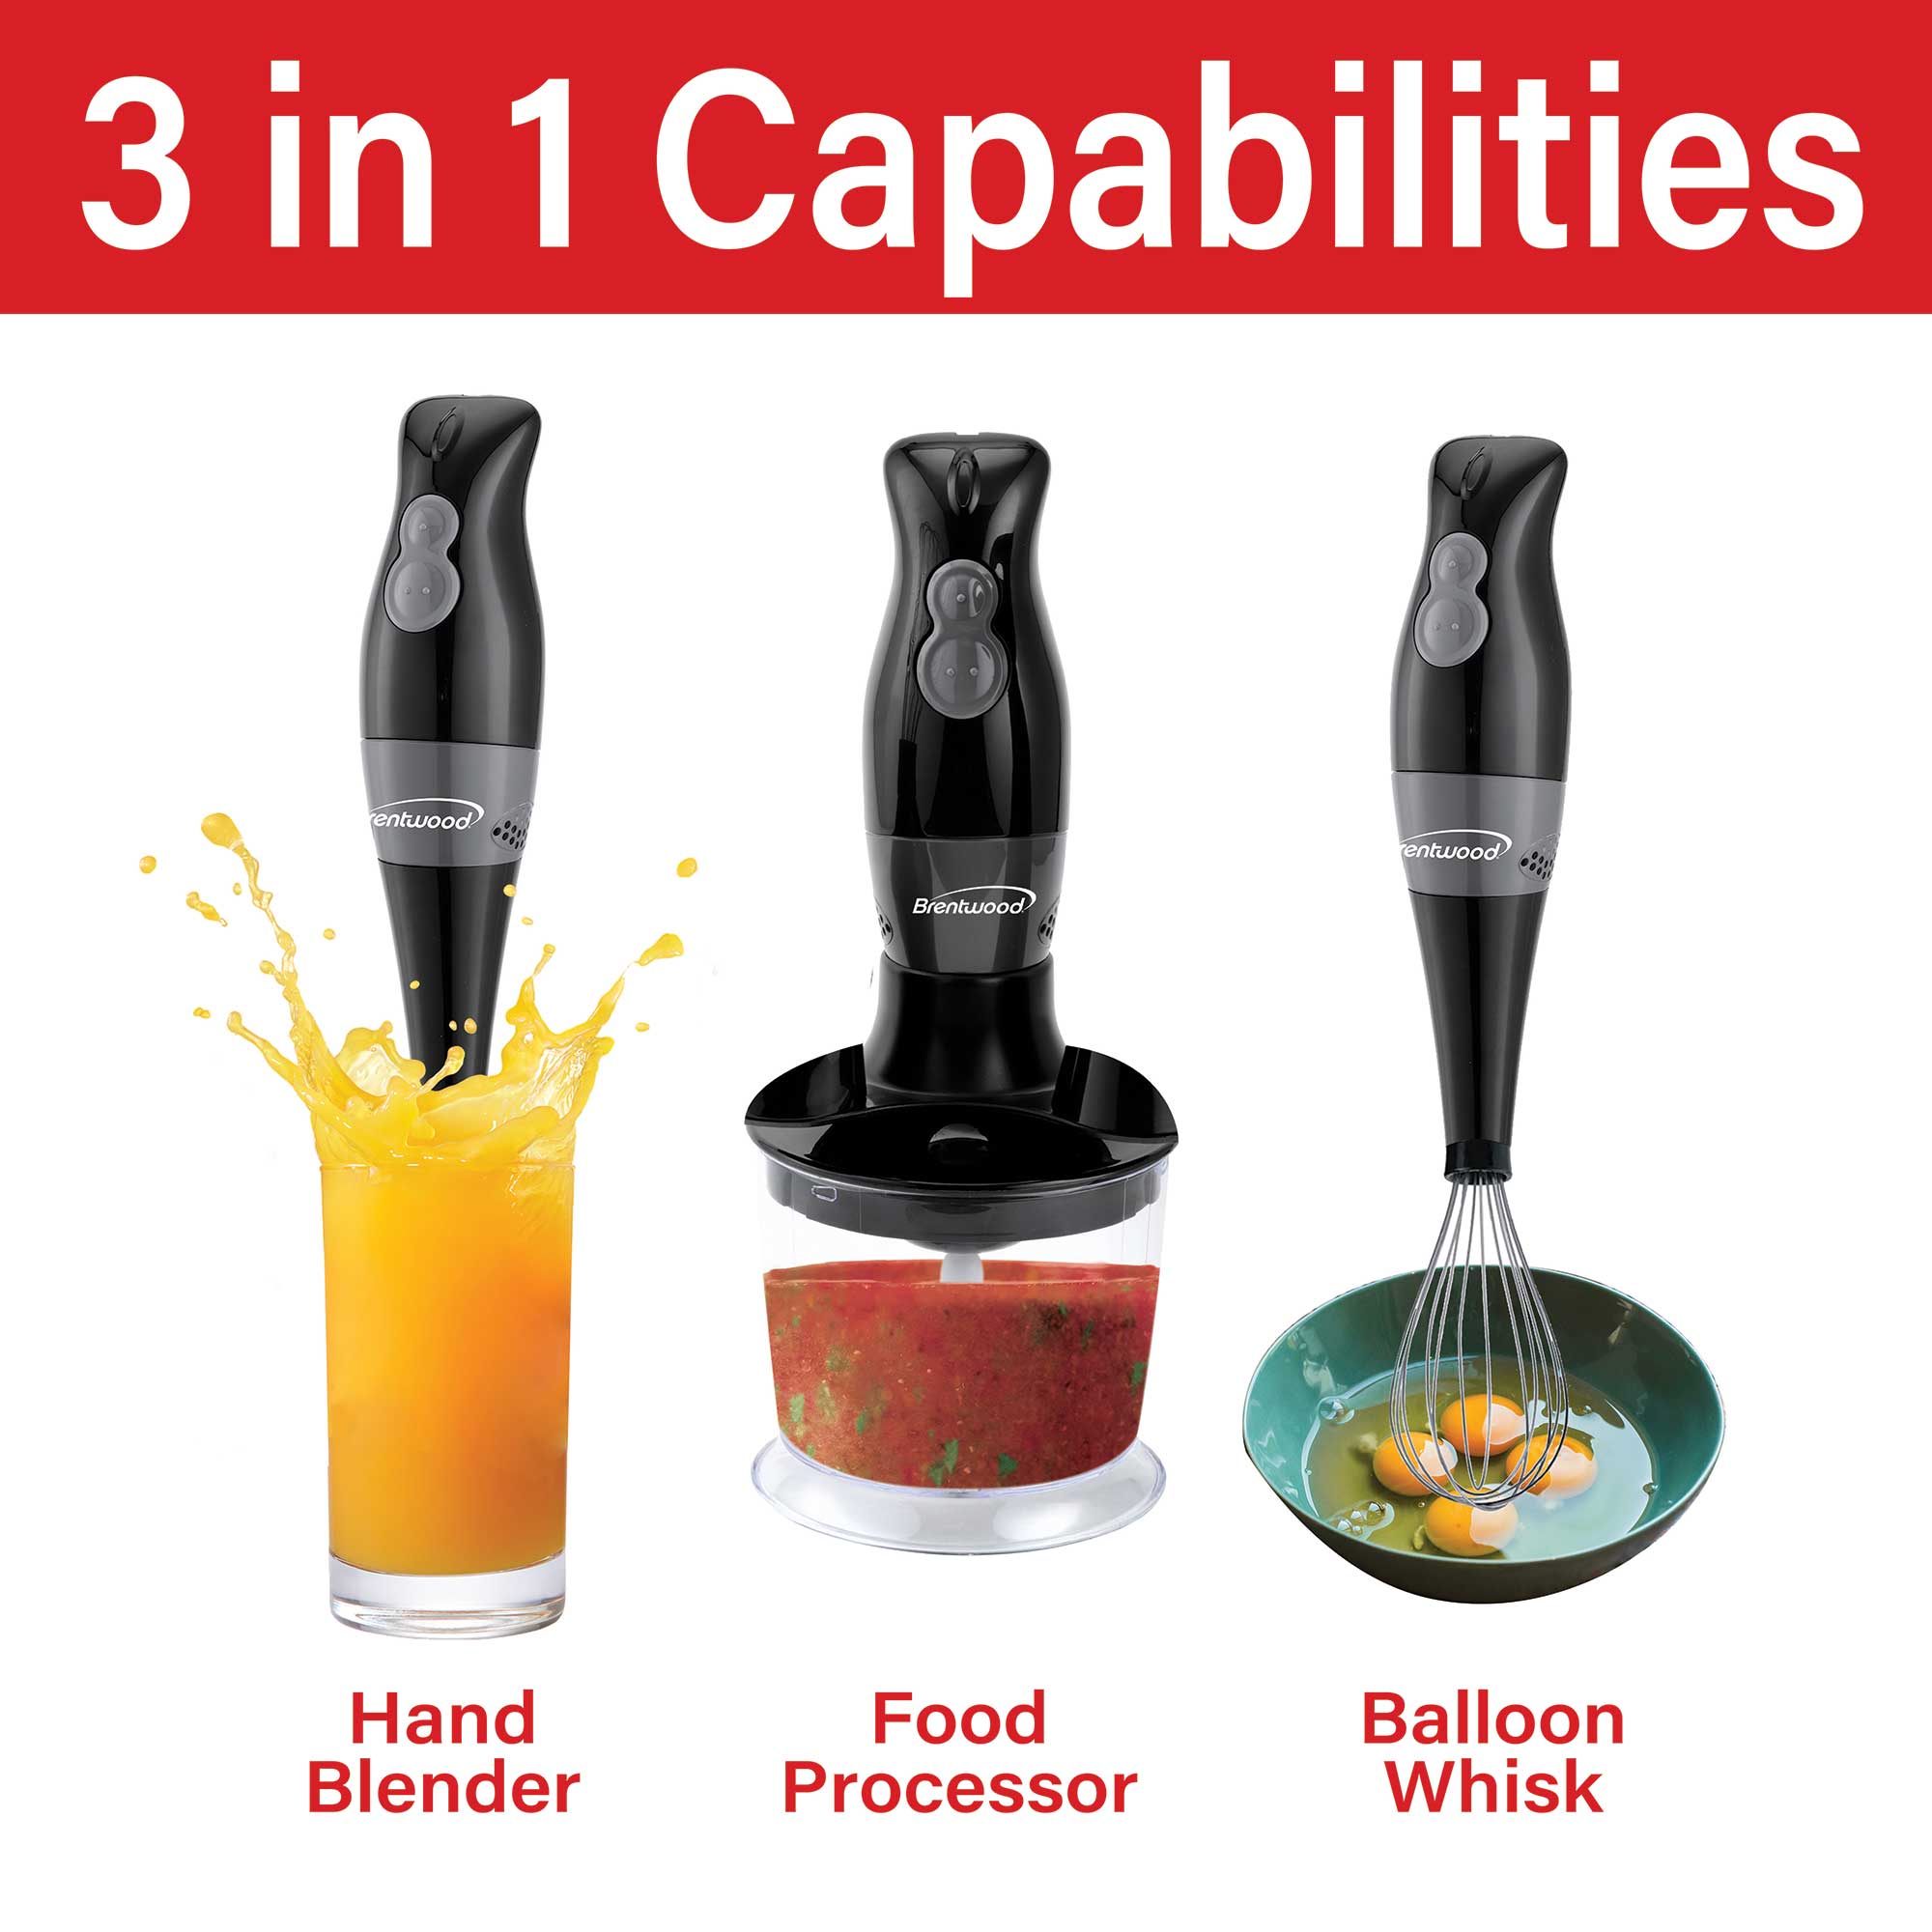 Why an immersion blender is the gadget your kitchen is missing